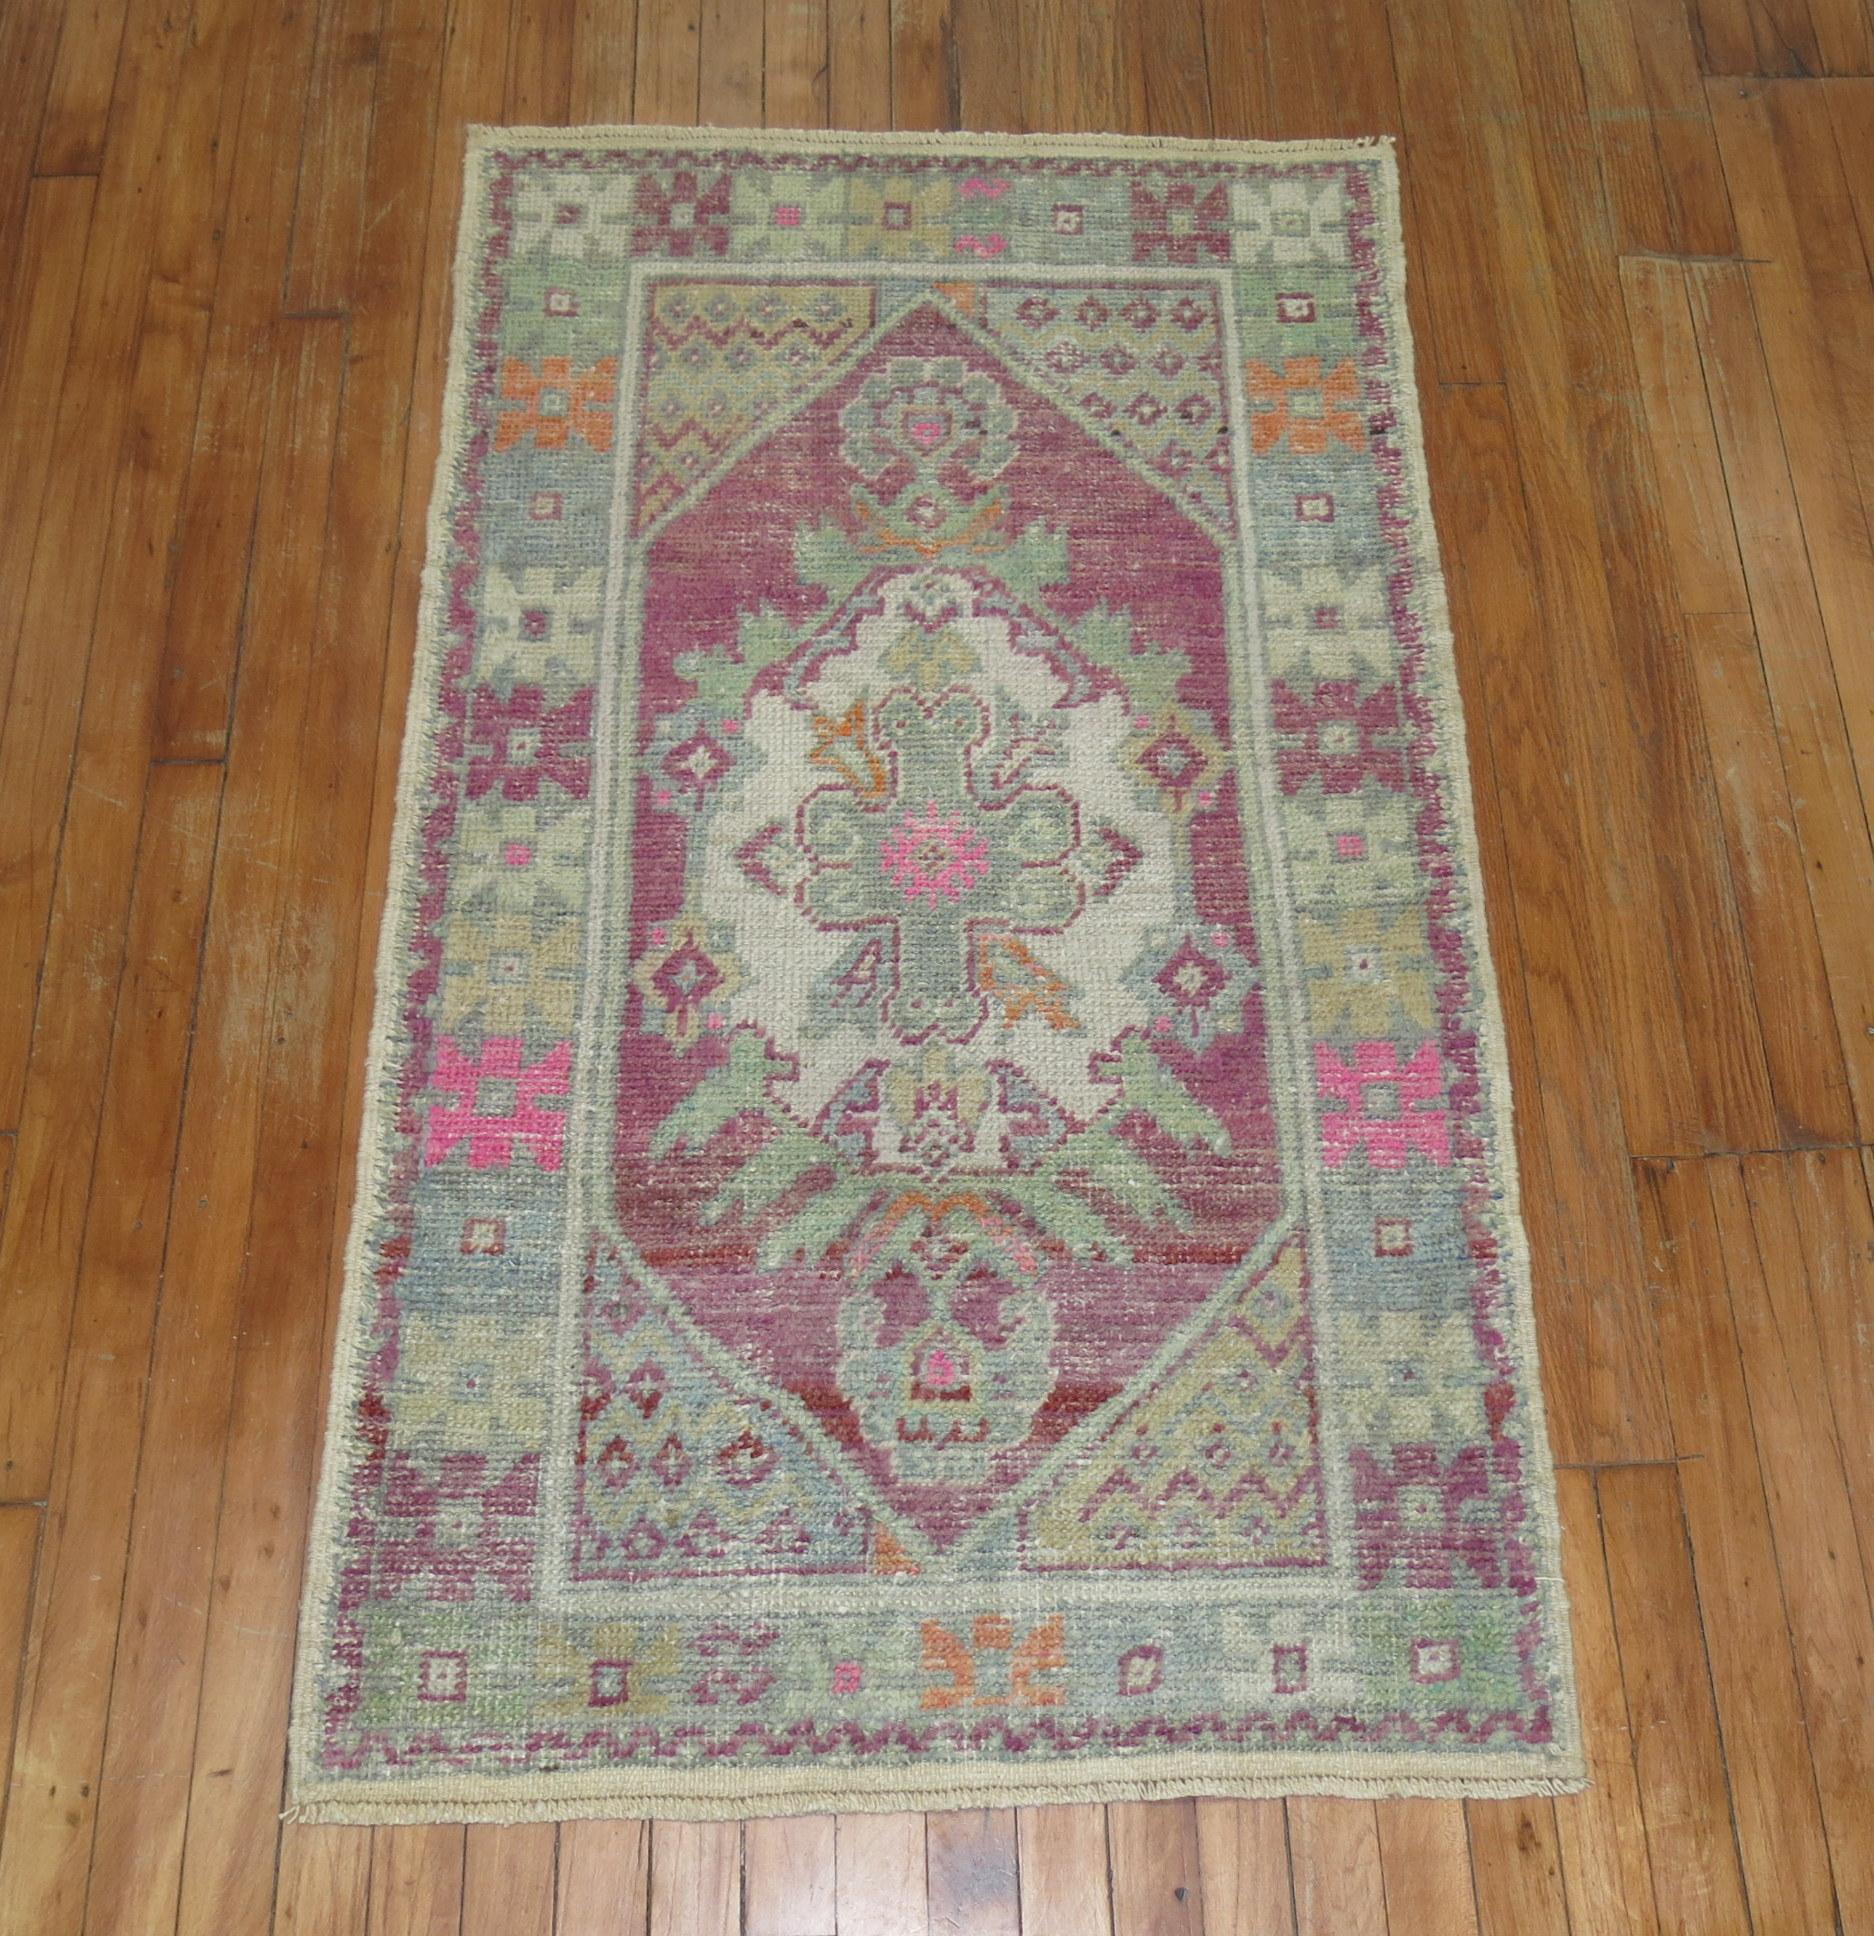 A pair of mid-20th century Turkish Anatolian rug mats with a lavender field pops of green and pink accents. One piece is 1 inch wider than the other.

2'8